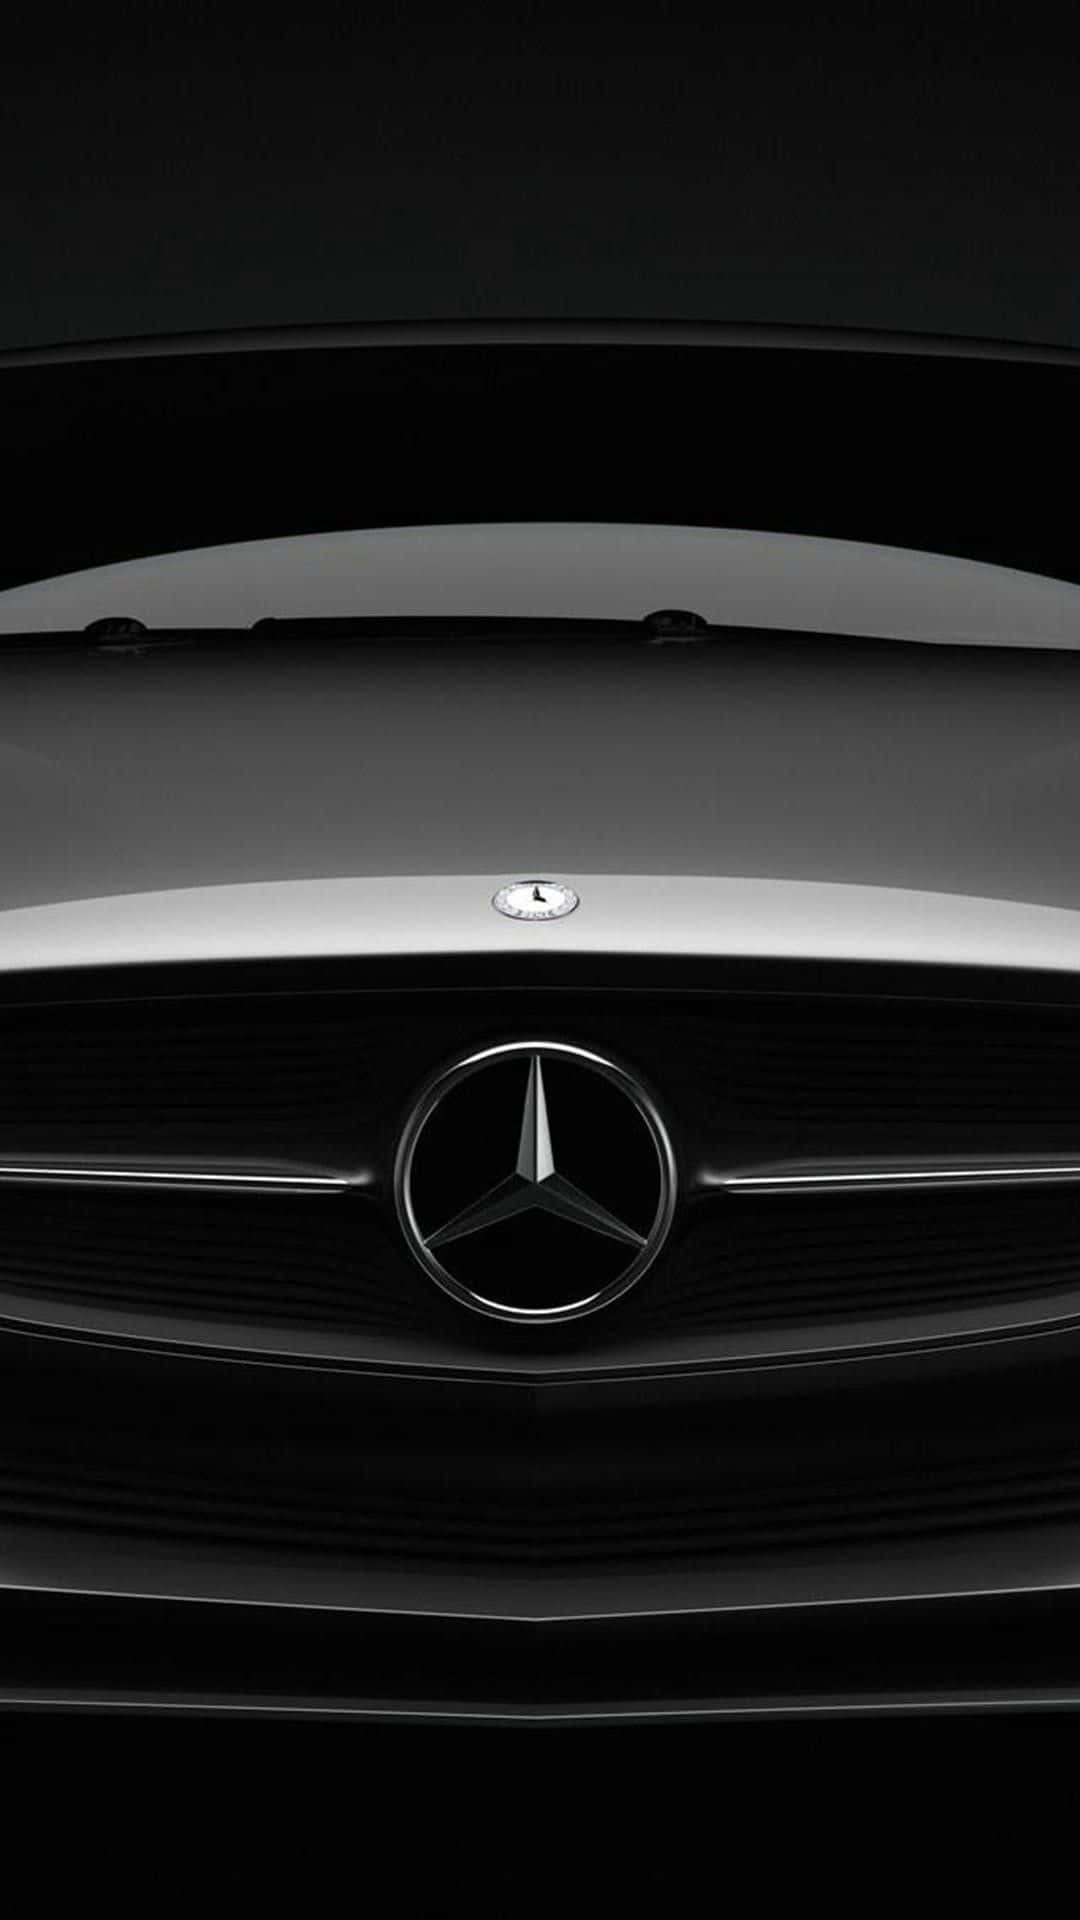 Check out the latest Mercedes-Benz Iphone Wallpaper